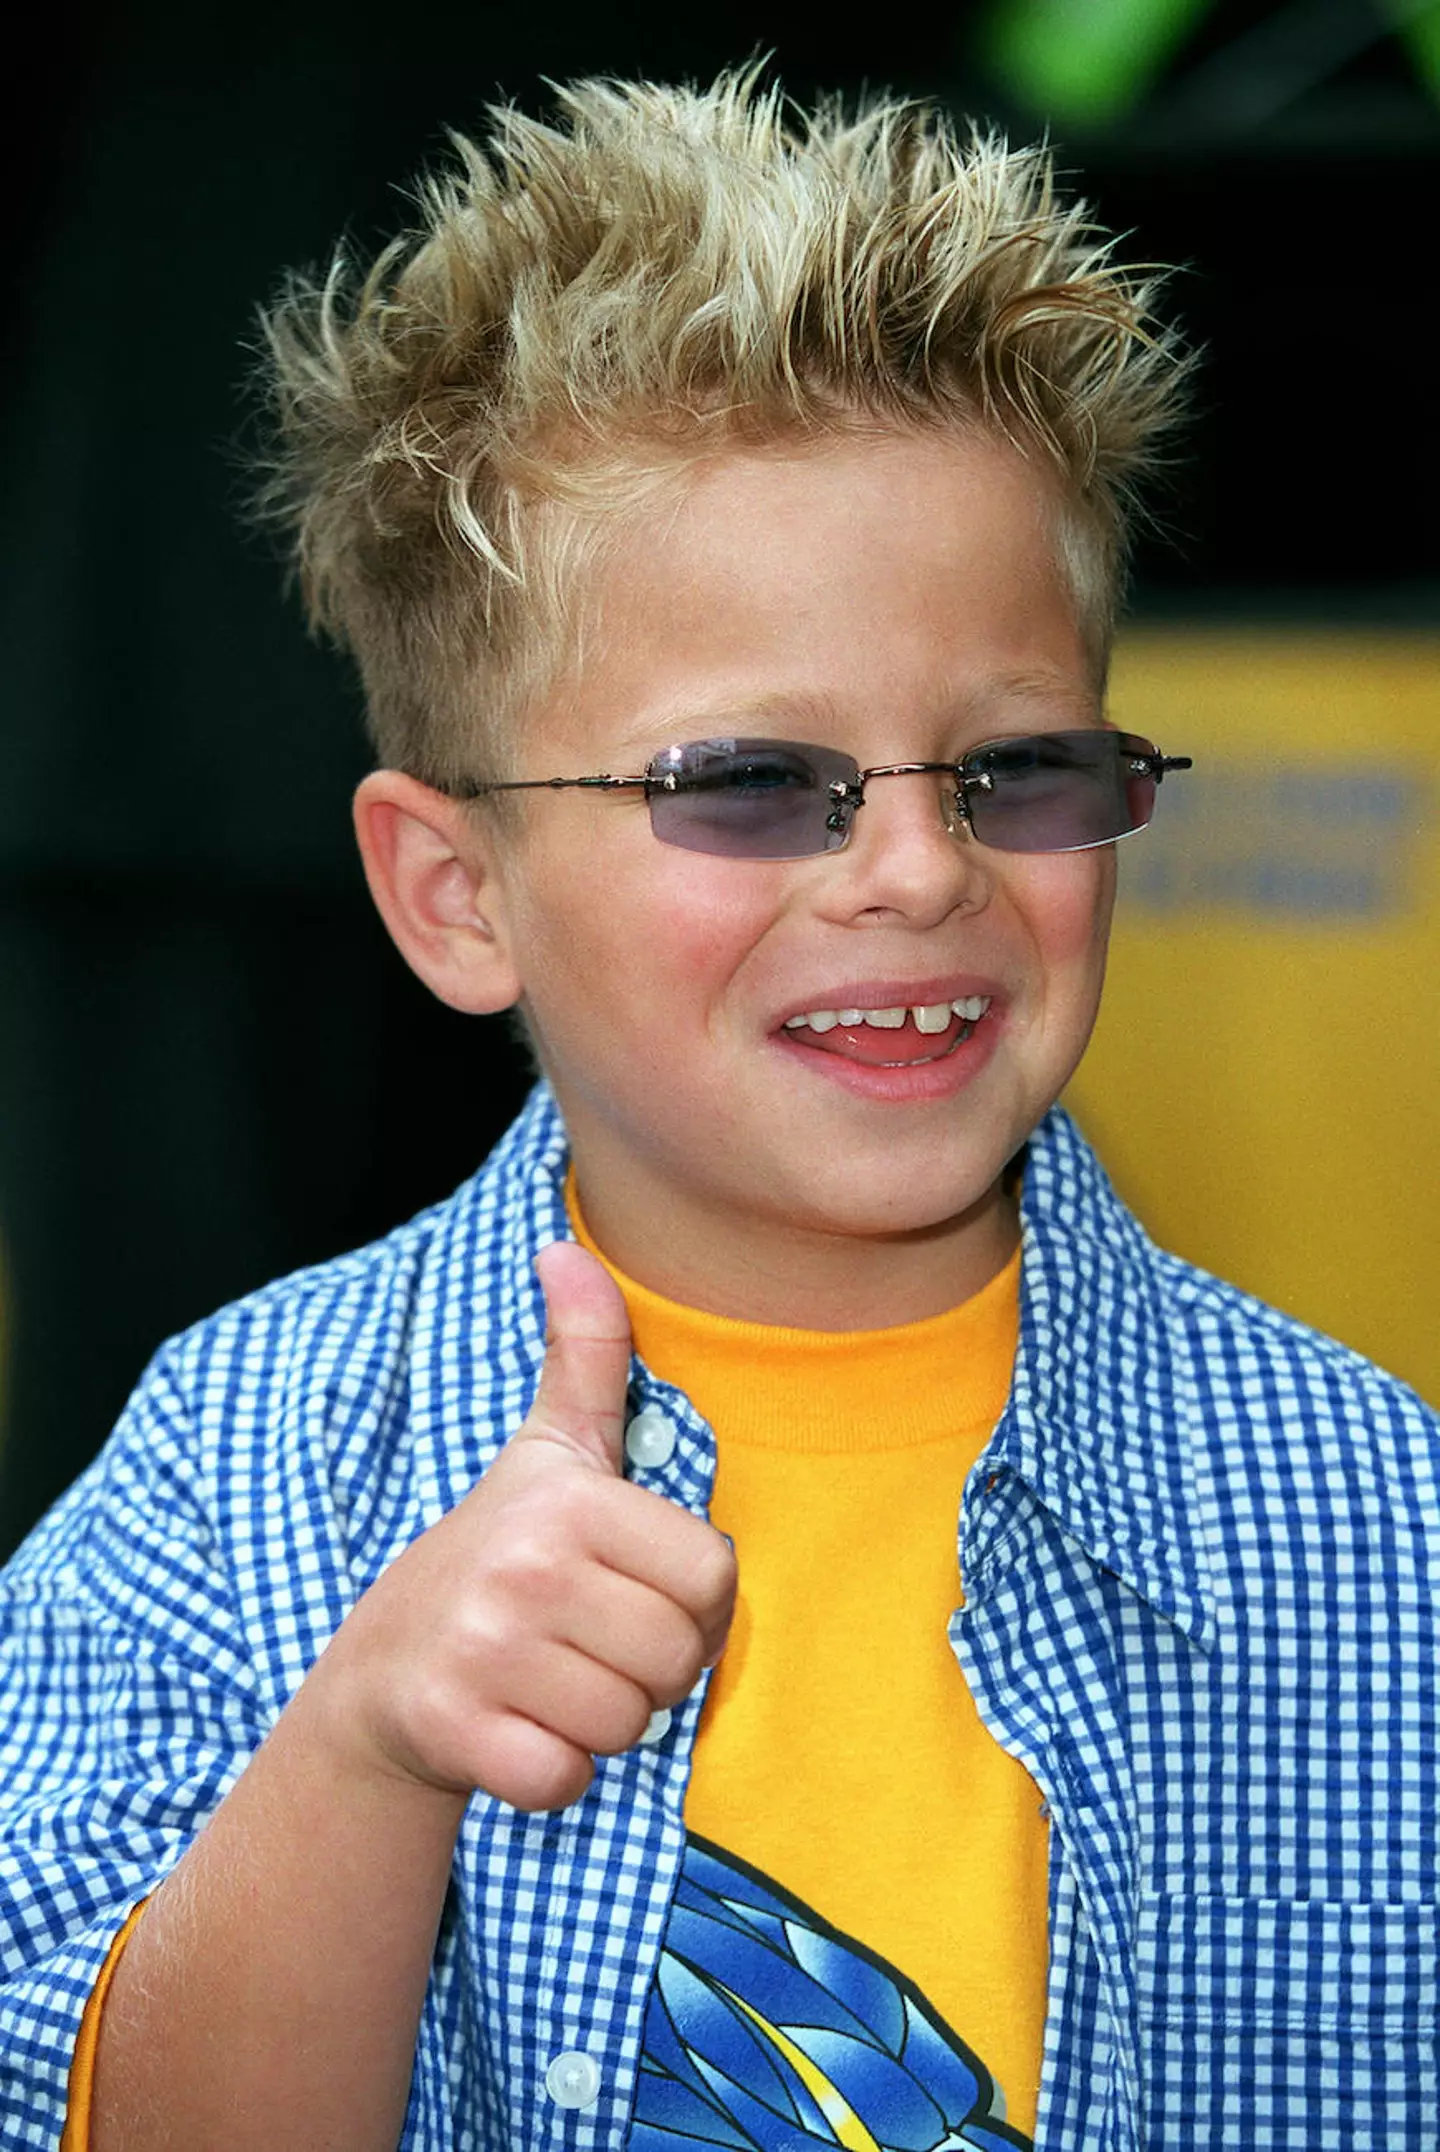 Back in the day, a 6-year-old Jonathan Lipnicki, looked like the most sweet and innocent kid around.